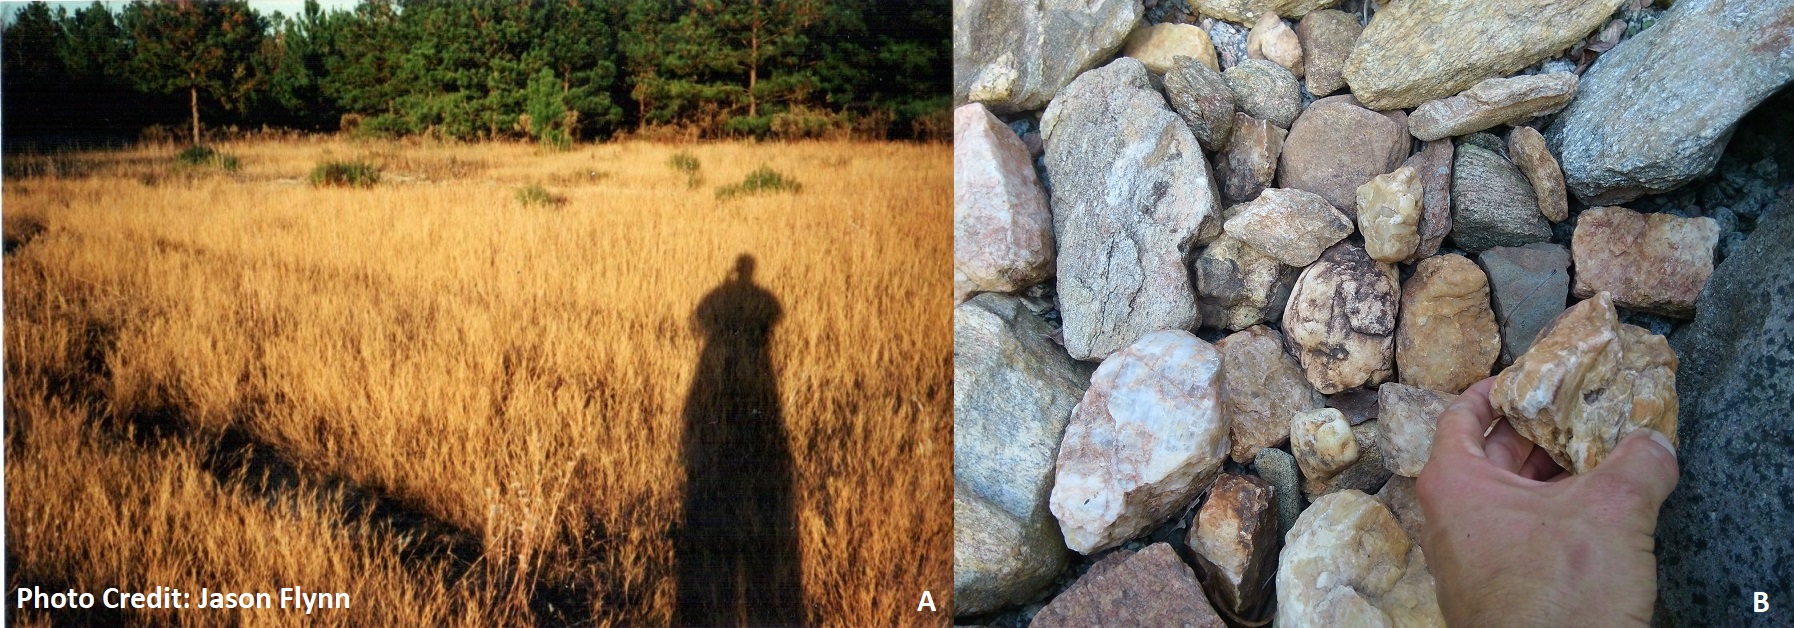 A) Photo from the mid 1990’s - my long winter’s shadow in the Barnwell Sand formation, on a sandhill in the Upper Coastal Plain of SC. B) The first rocks found on display – from 1994 - in Spartanburg County by the Greenville County line.